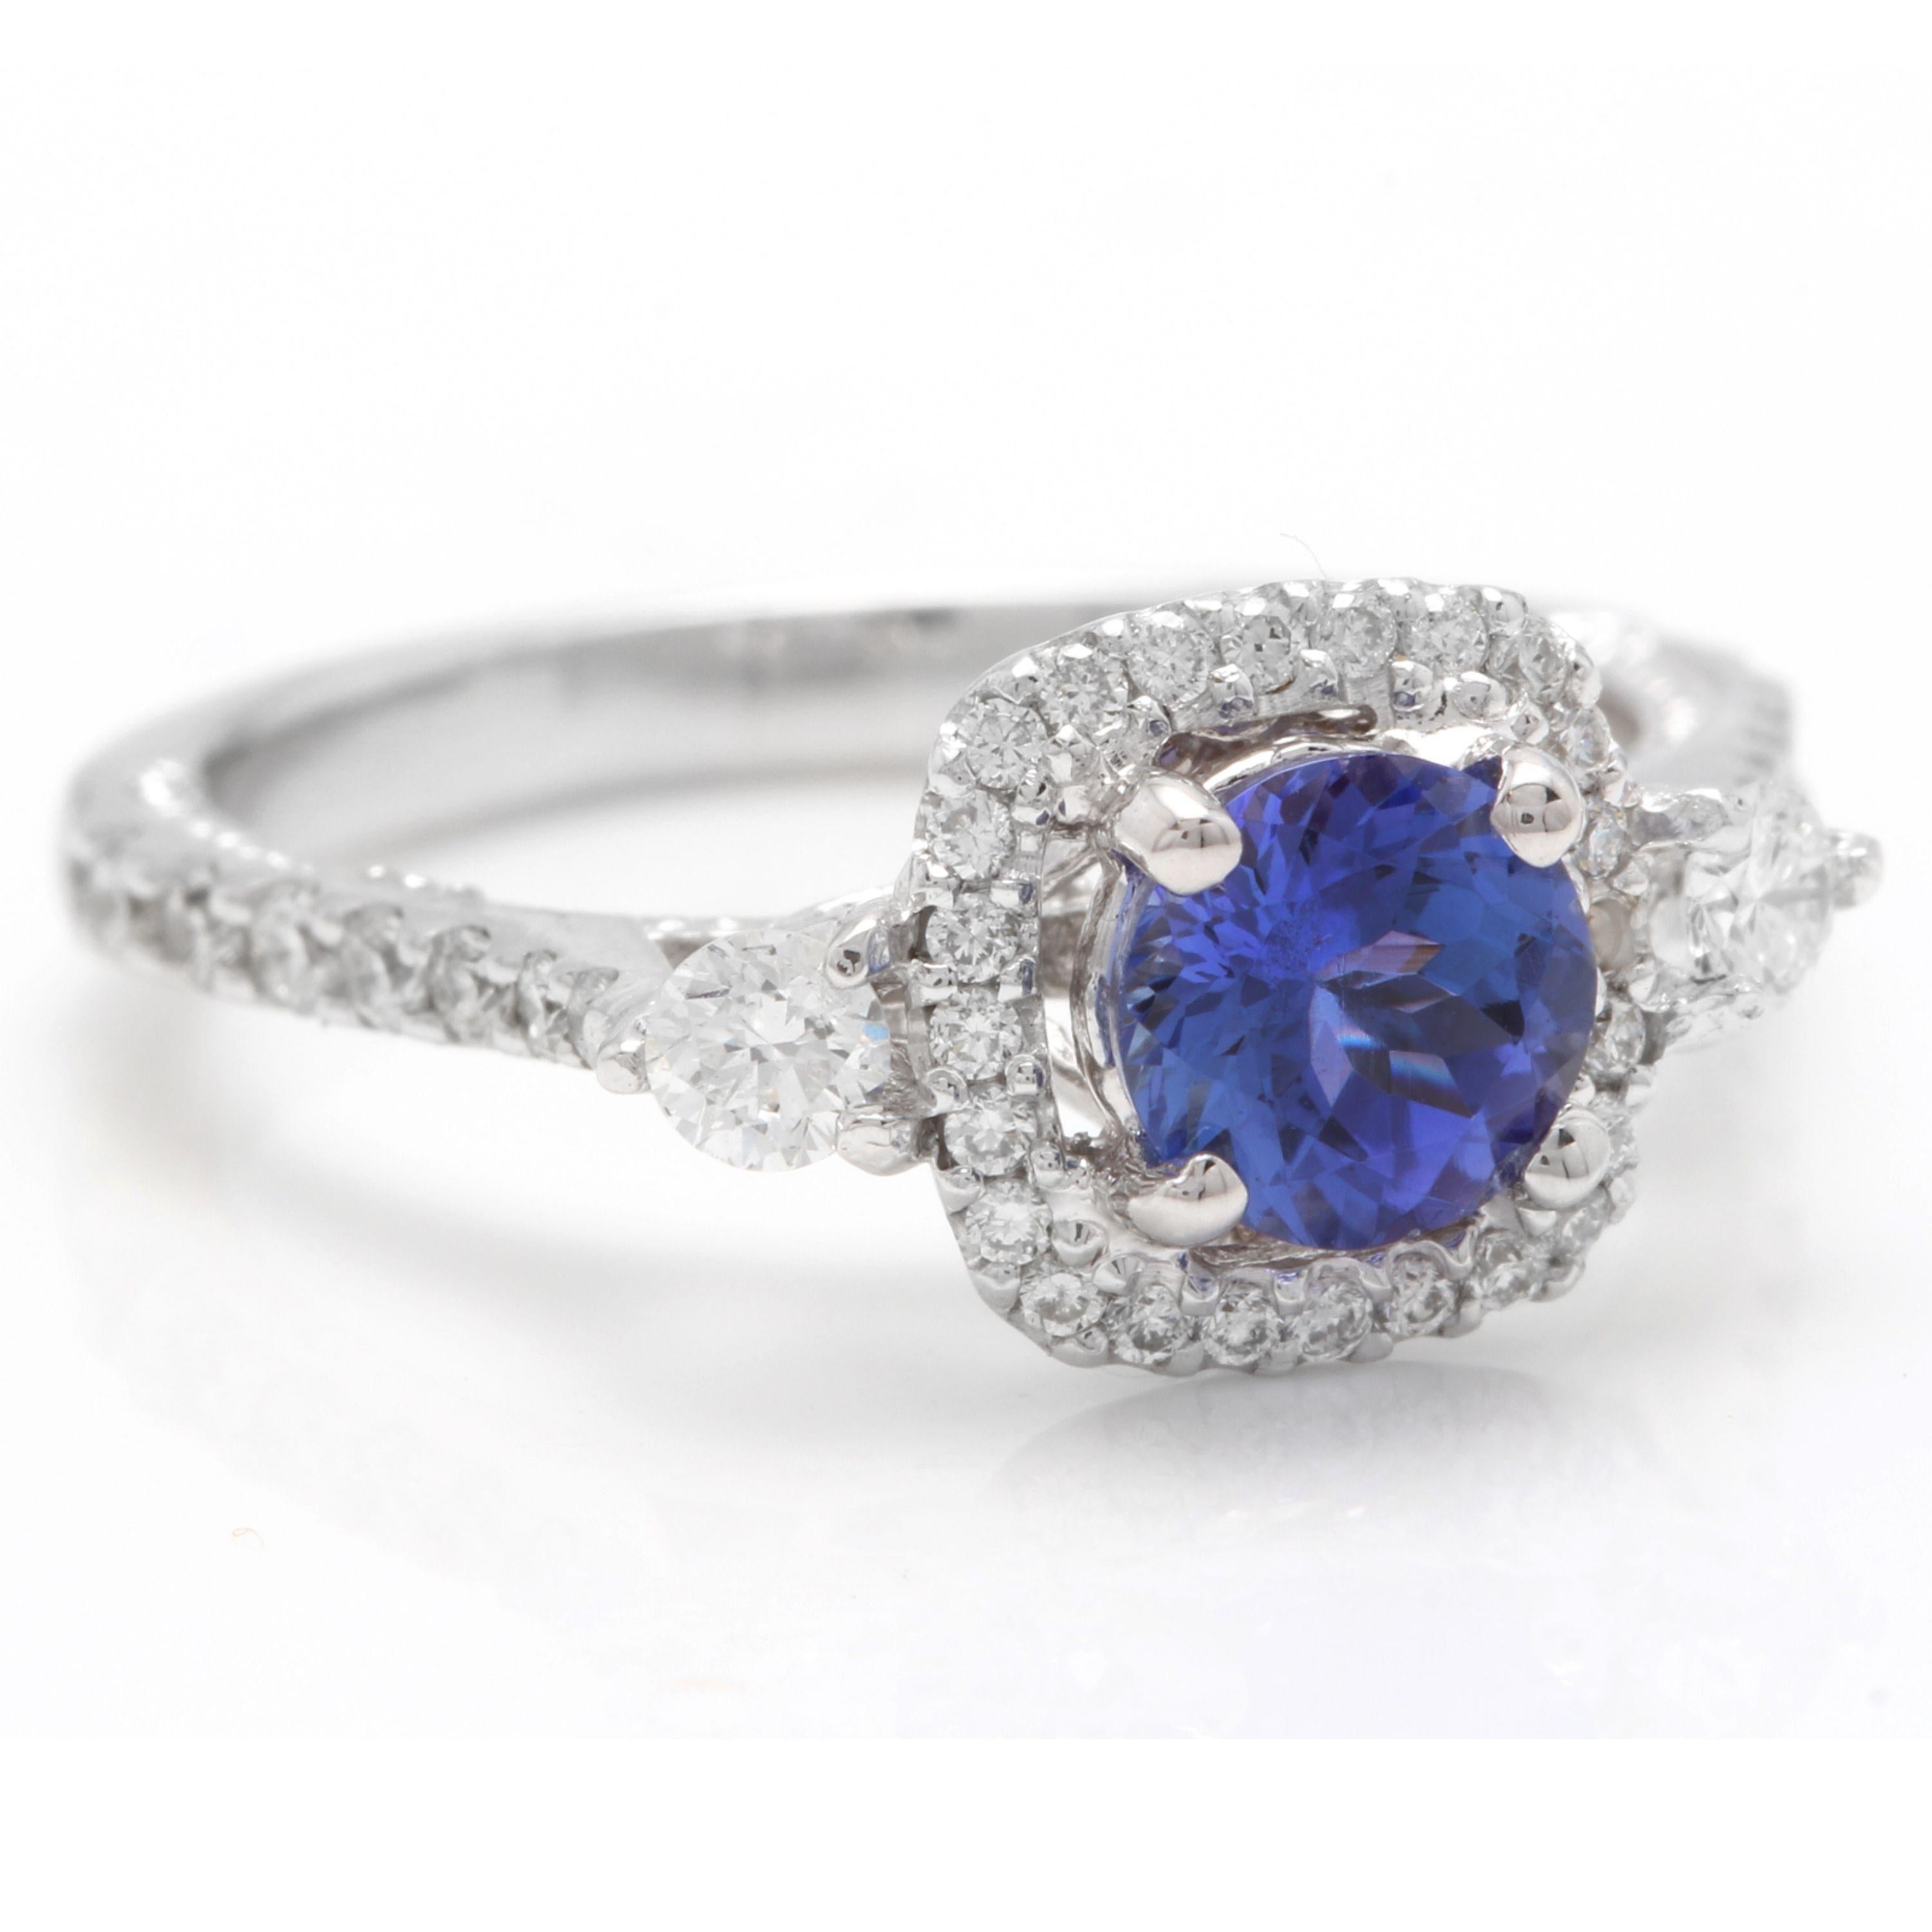 1.60 Carats Natural Very Nice Looking Tanzanite and Diamond 14K Solid White Gold Ring

Total Natural Oval Cut Tanzanite Weight is: Approx. 0.95 Carats

Tanzanite Measures: Approx. 6.00mm

Natural Round Diamonds Weight: Approx. 0.65 Carats (color G-H